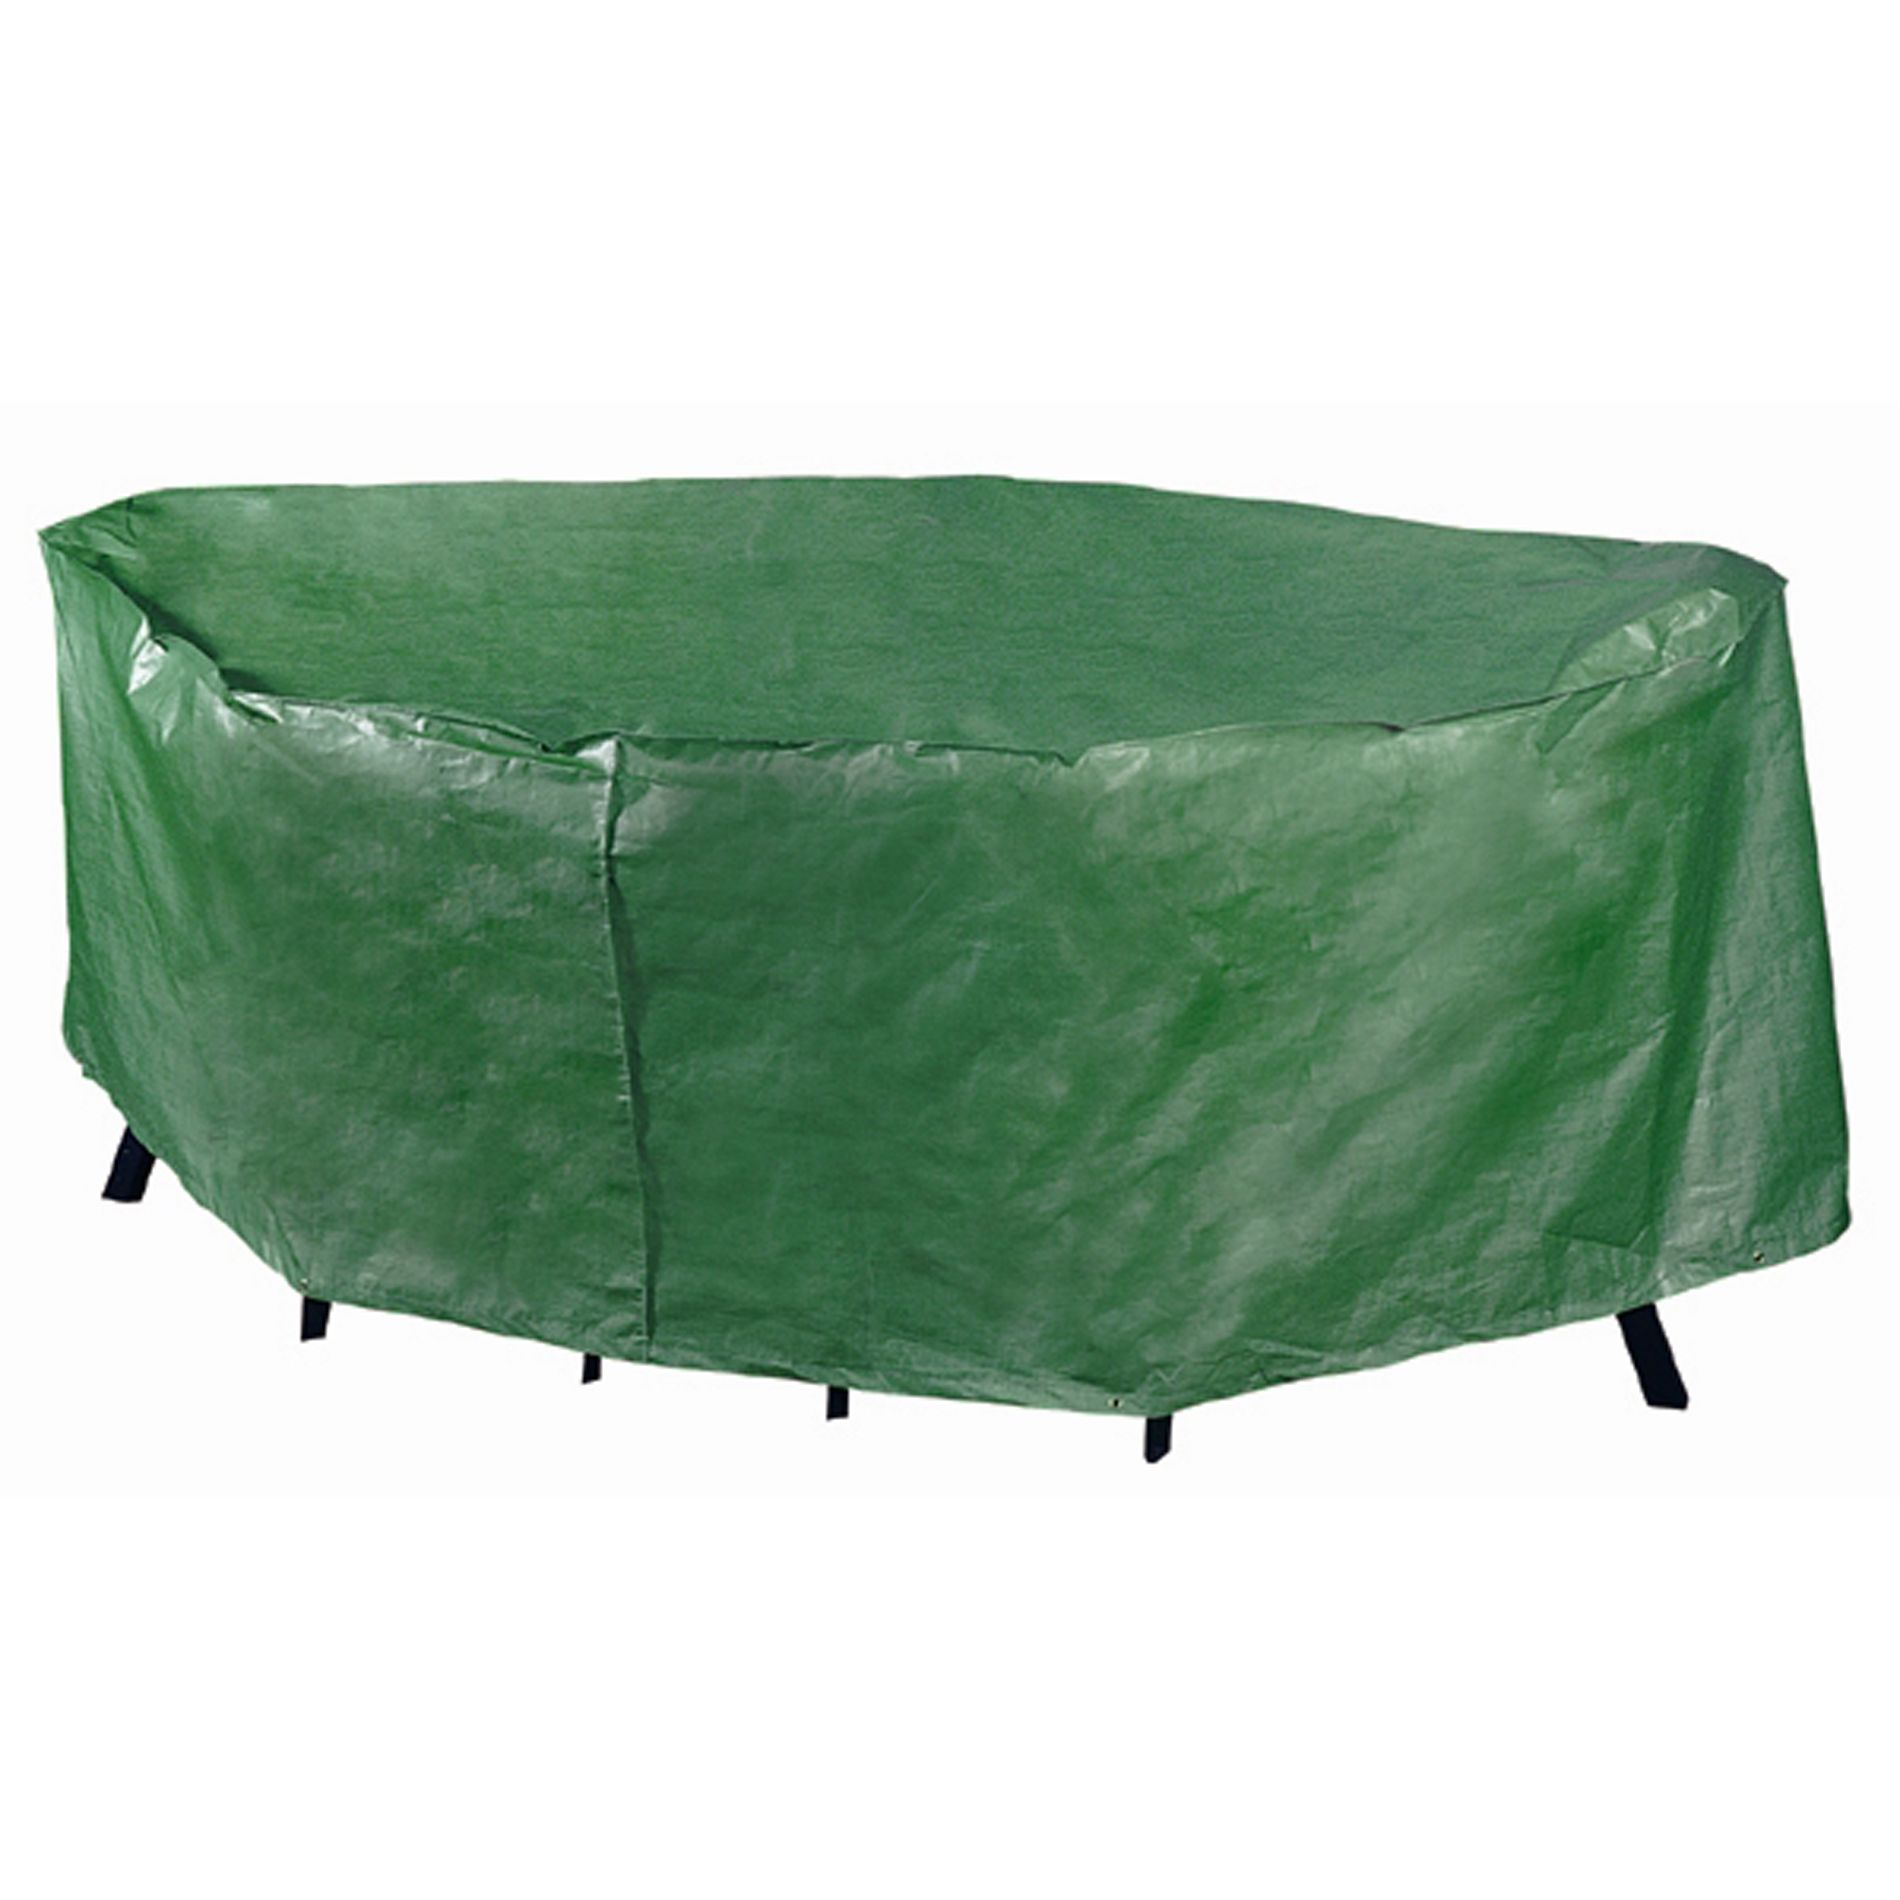 4-Seat Rectangle Patio Set Cover